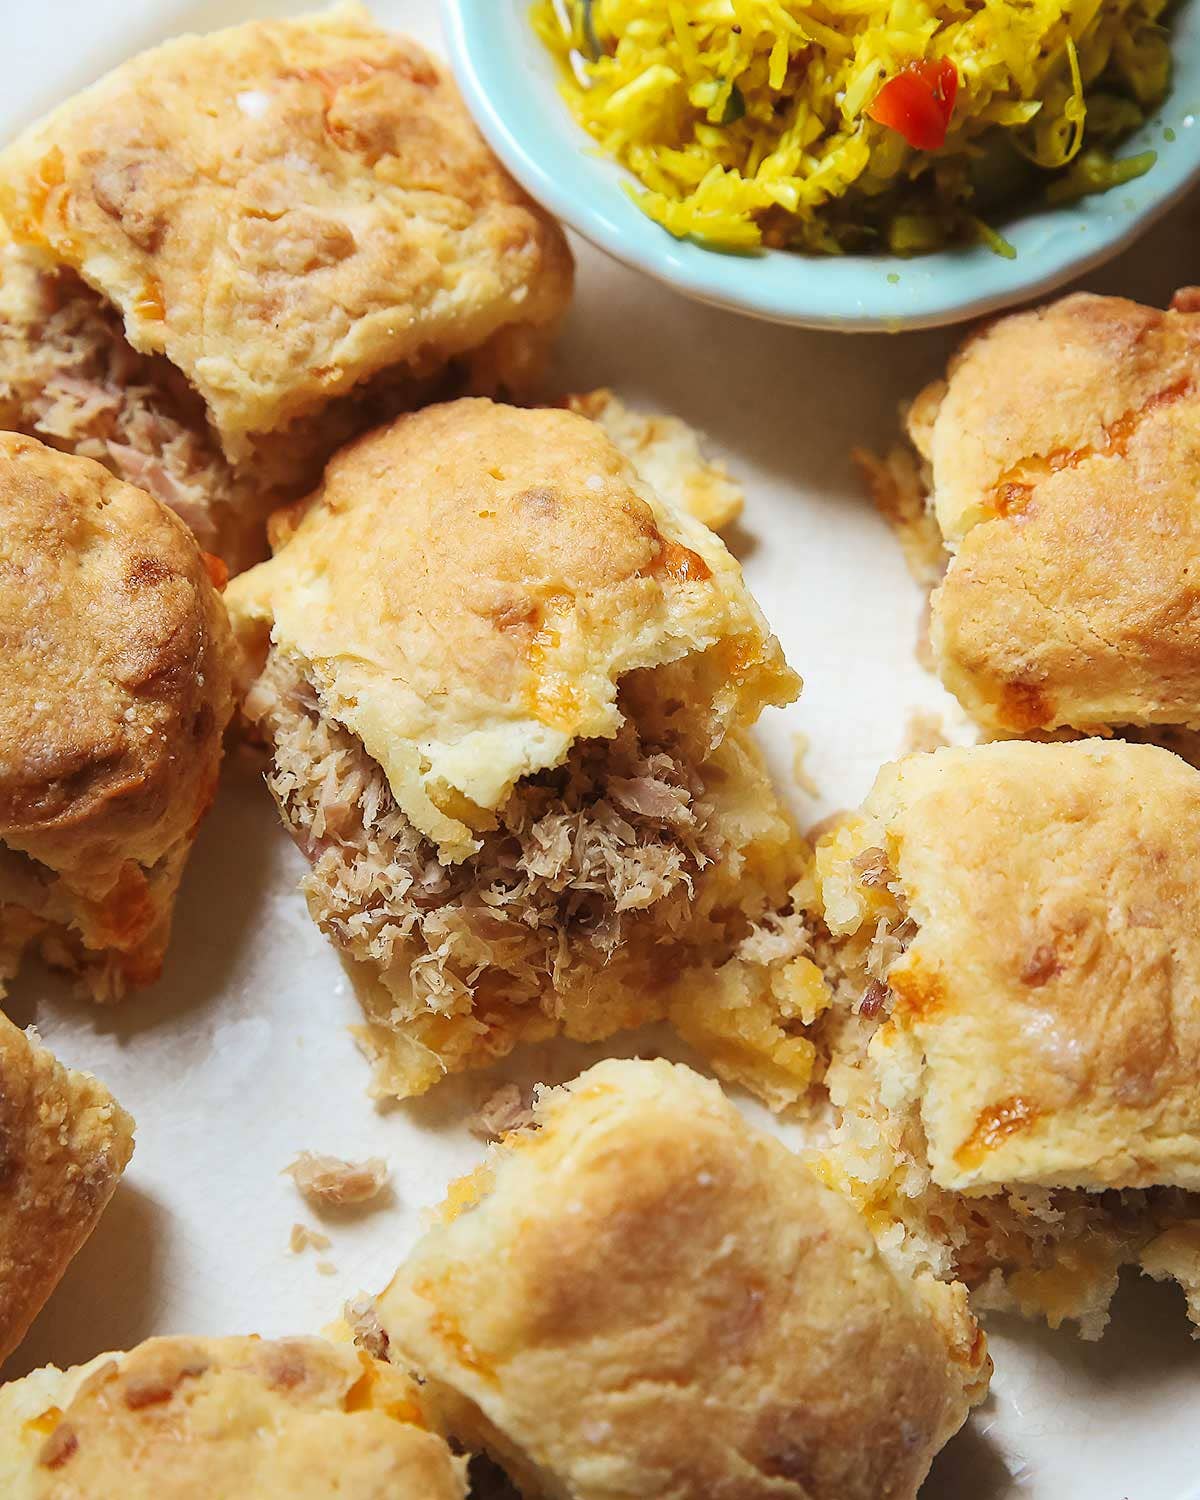 You Should Serve These Biscuits at Your Next Cocktail Party